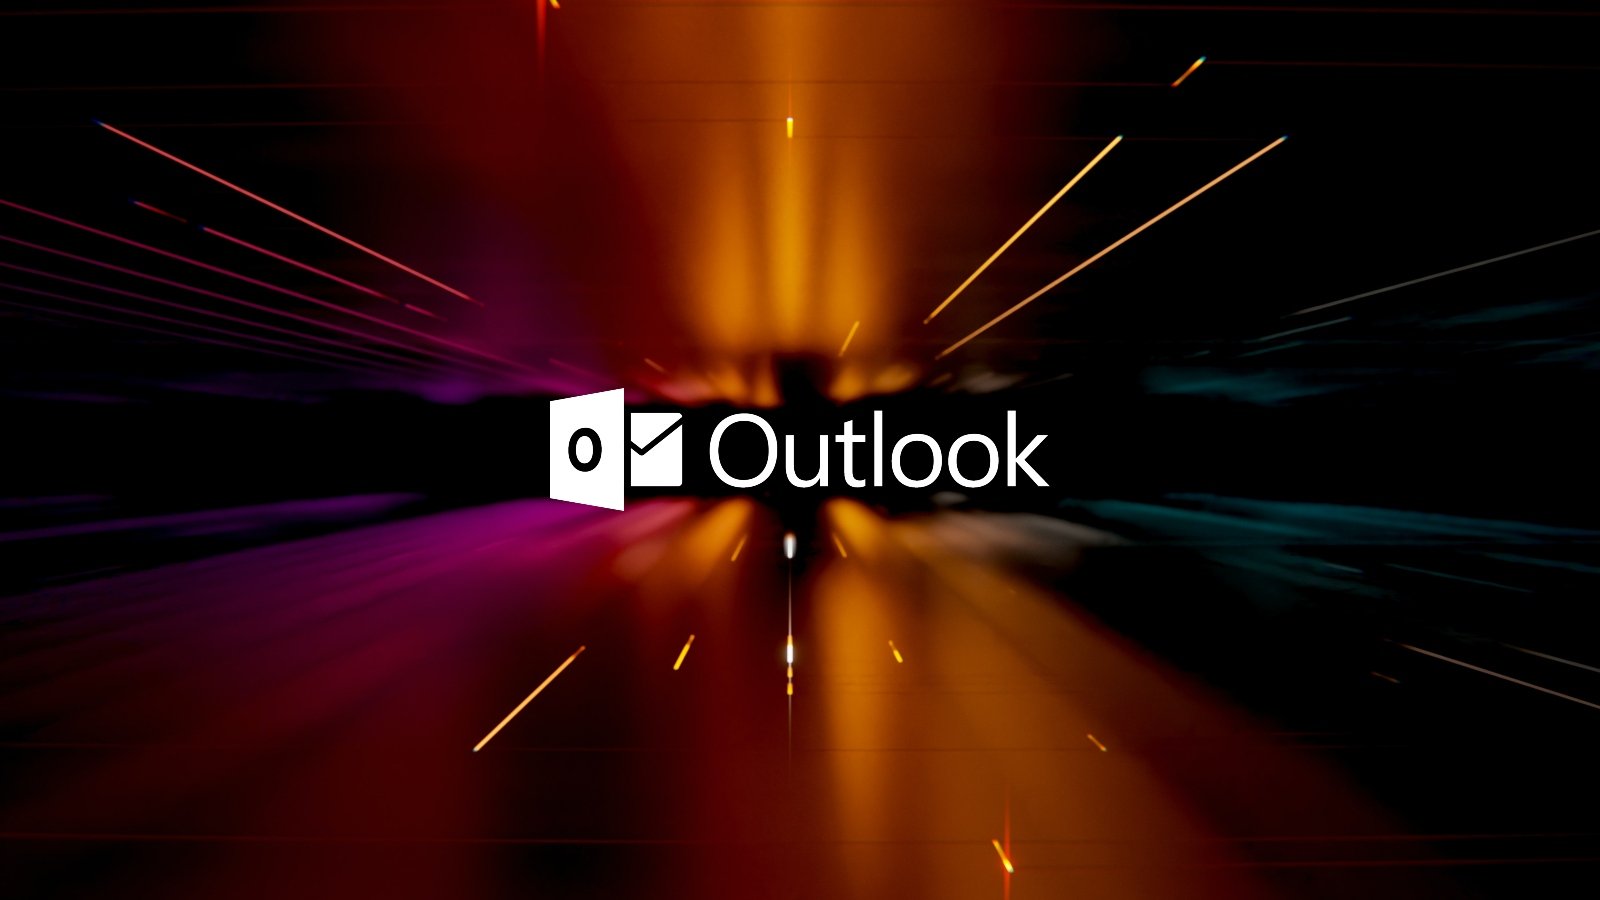 Microsoft shares workaround for ongoing Outlook login issues